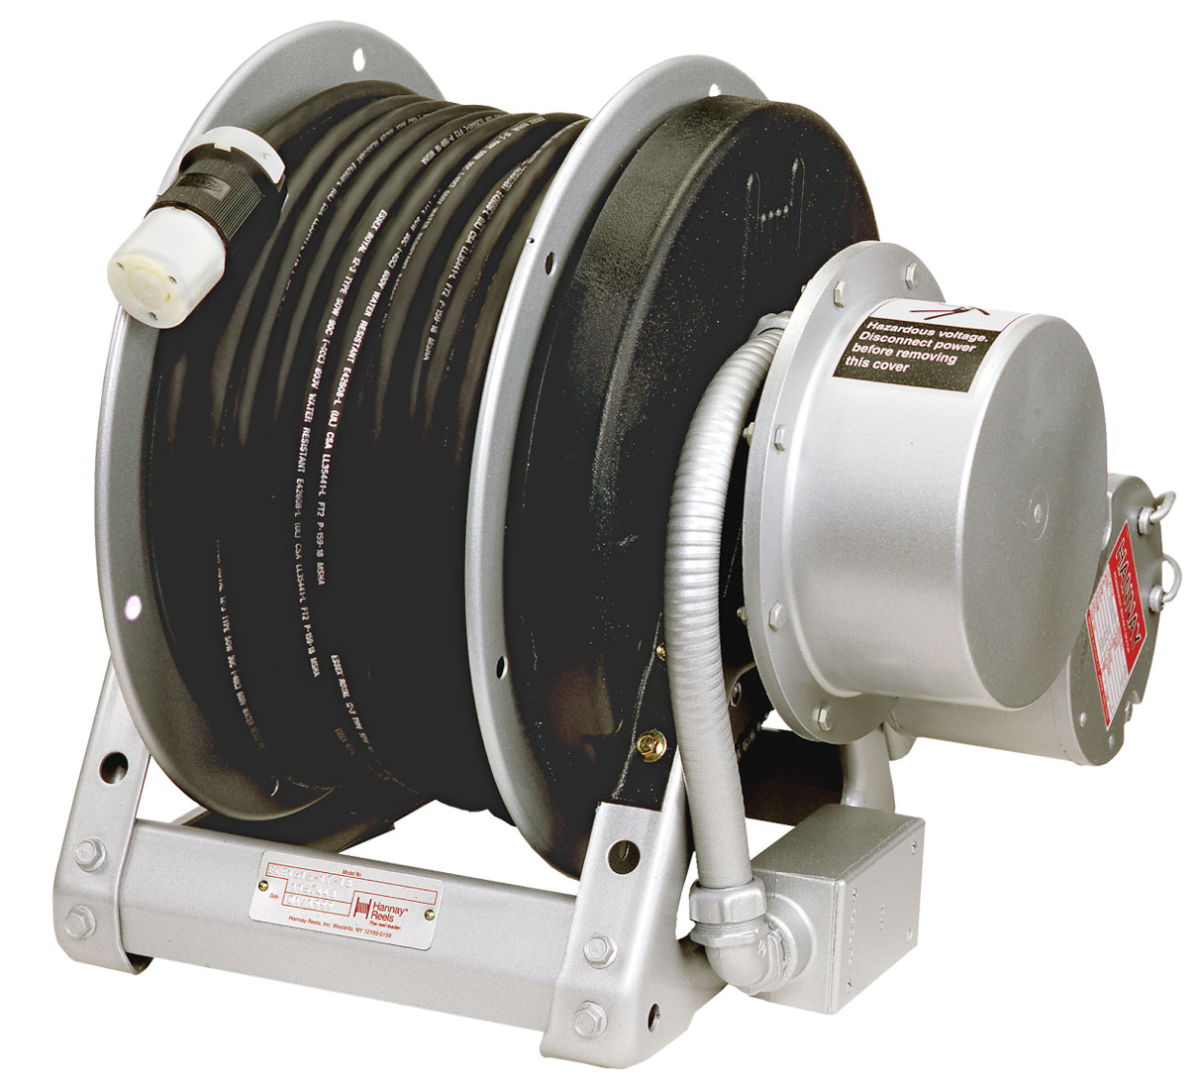 Cable & Cord Reels Image